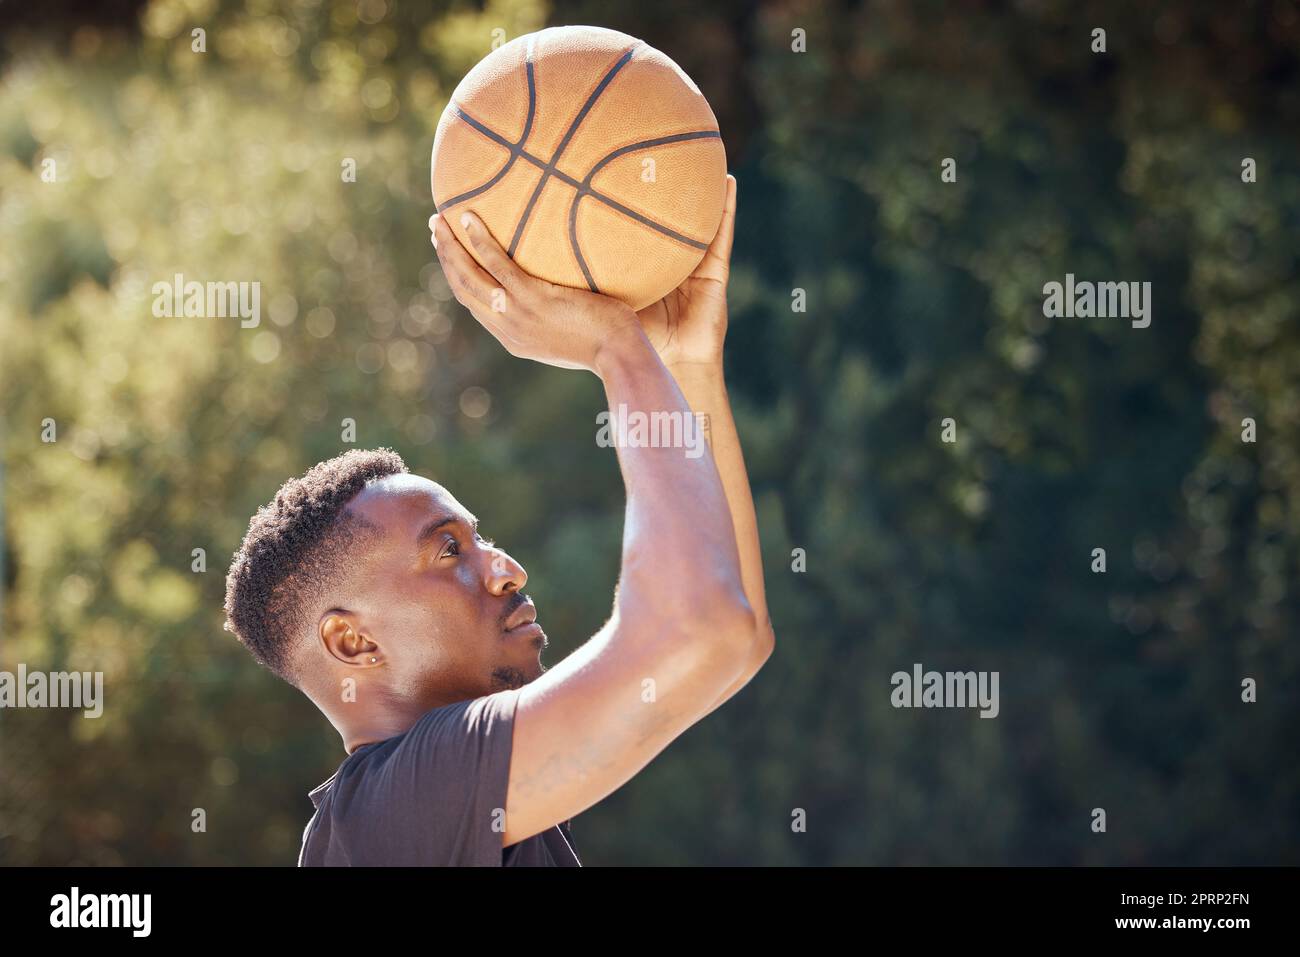 Basketball, sports and exercise workout of a man doing fitness, health and cardio training